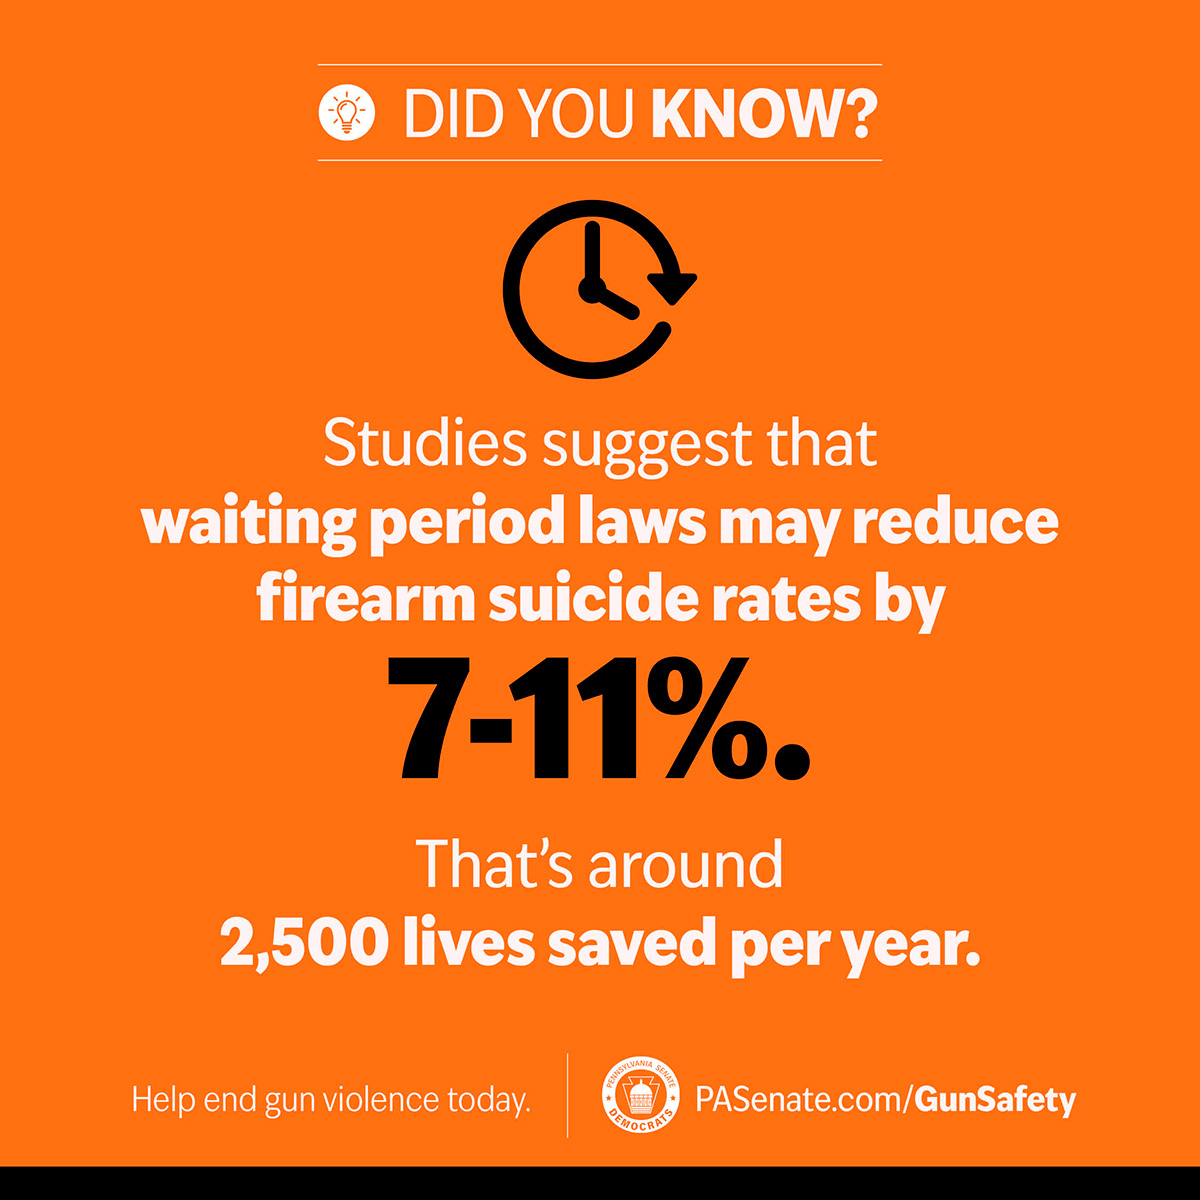 Did you know? Studies suggest that waiting periods laws may reduce firearm suicide rates by 7-11%.